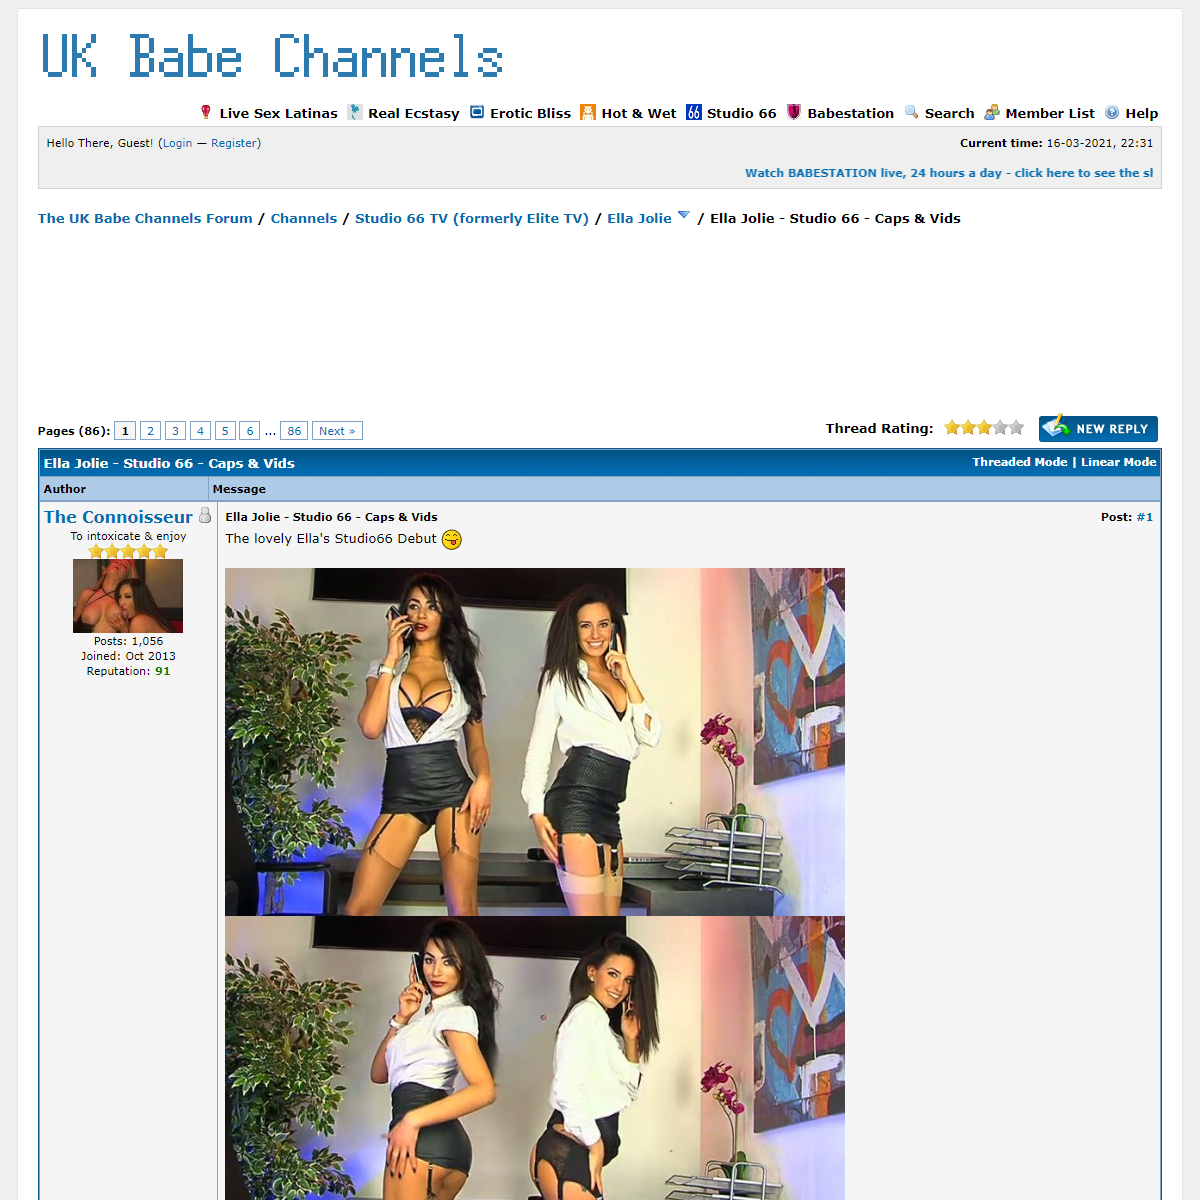 A complete backup of https://www.babeshows.co.uk/showthread.php?tid=63486